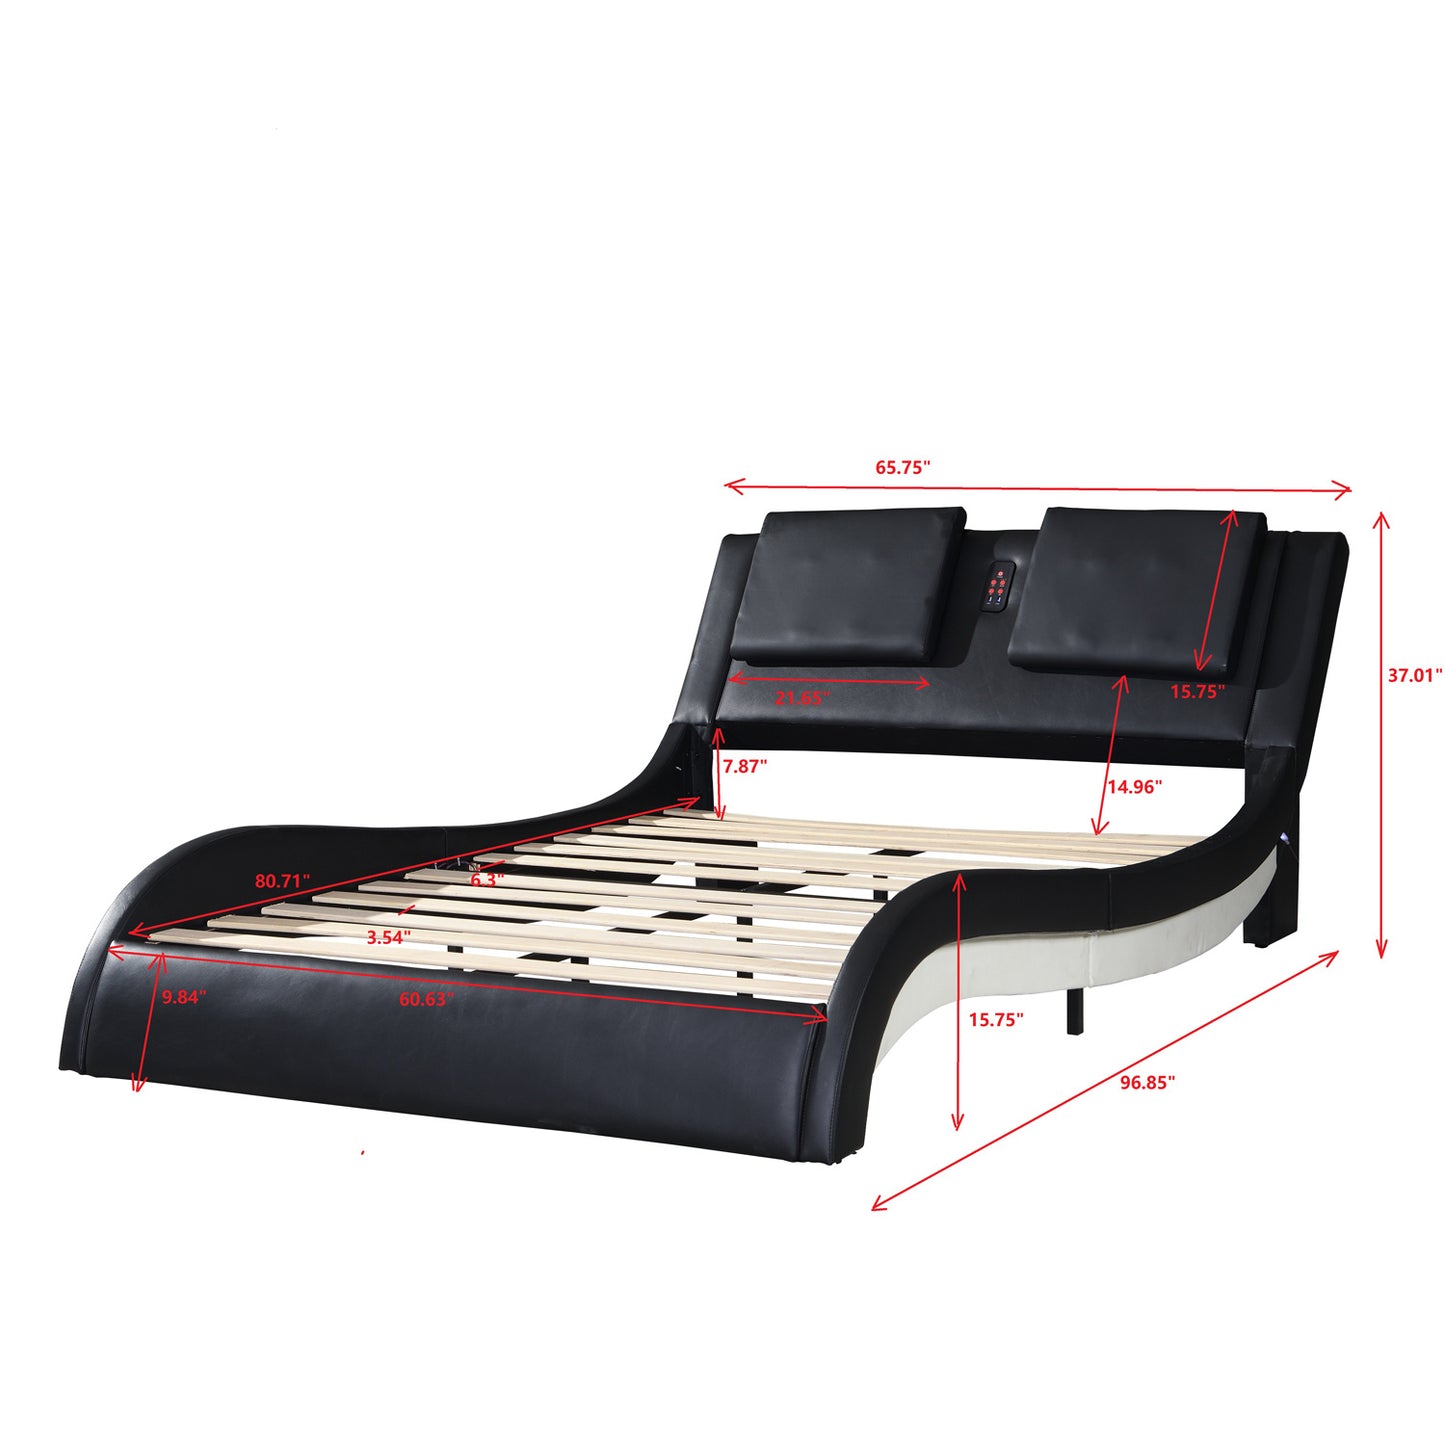 Leather Upholstered Platform Bed with LED lighting; Bluetooth connection to play music  RGB control; Backrest vibration massage